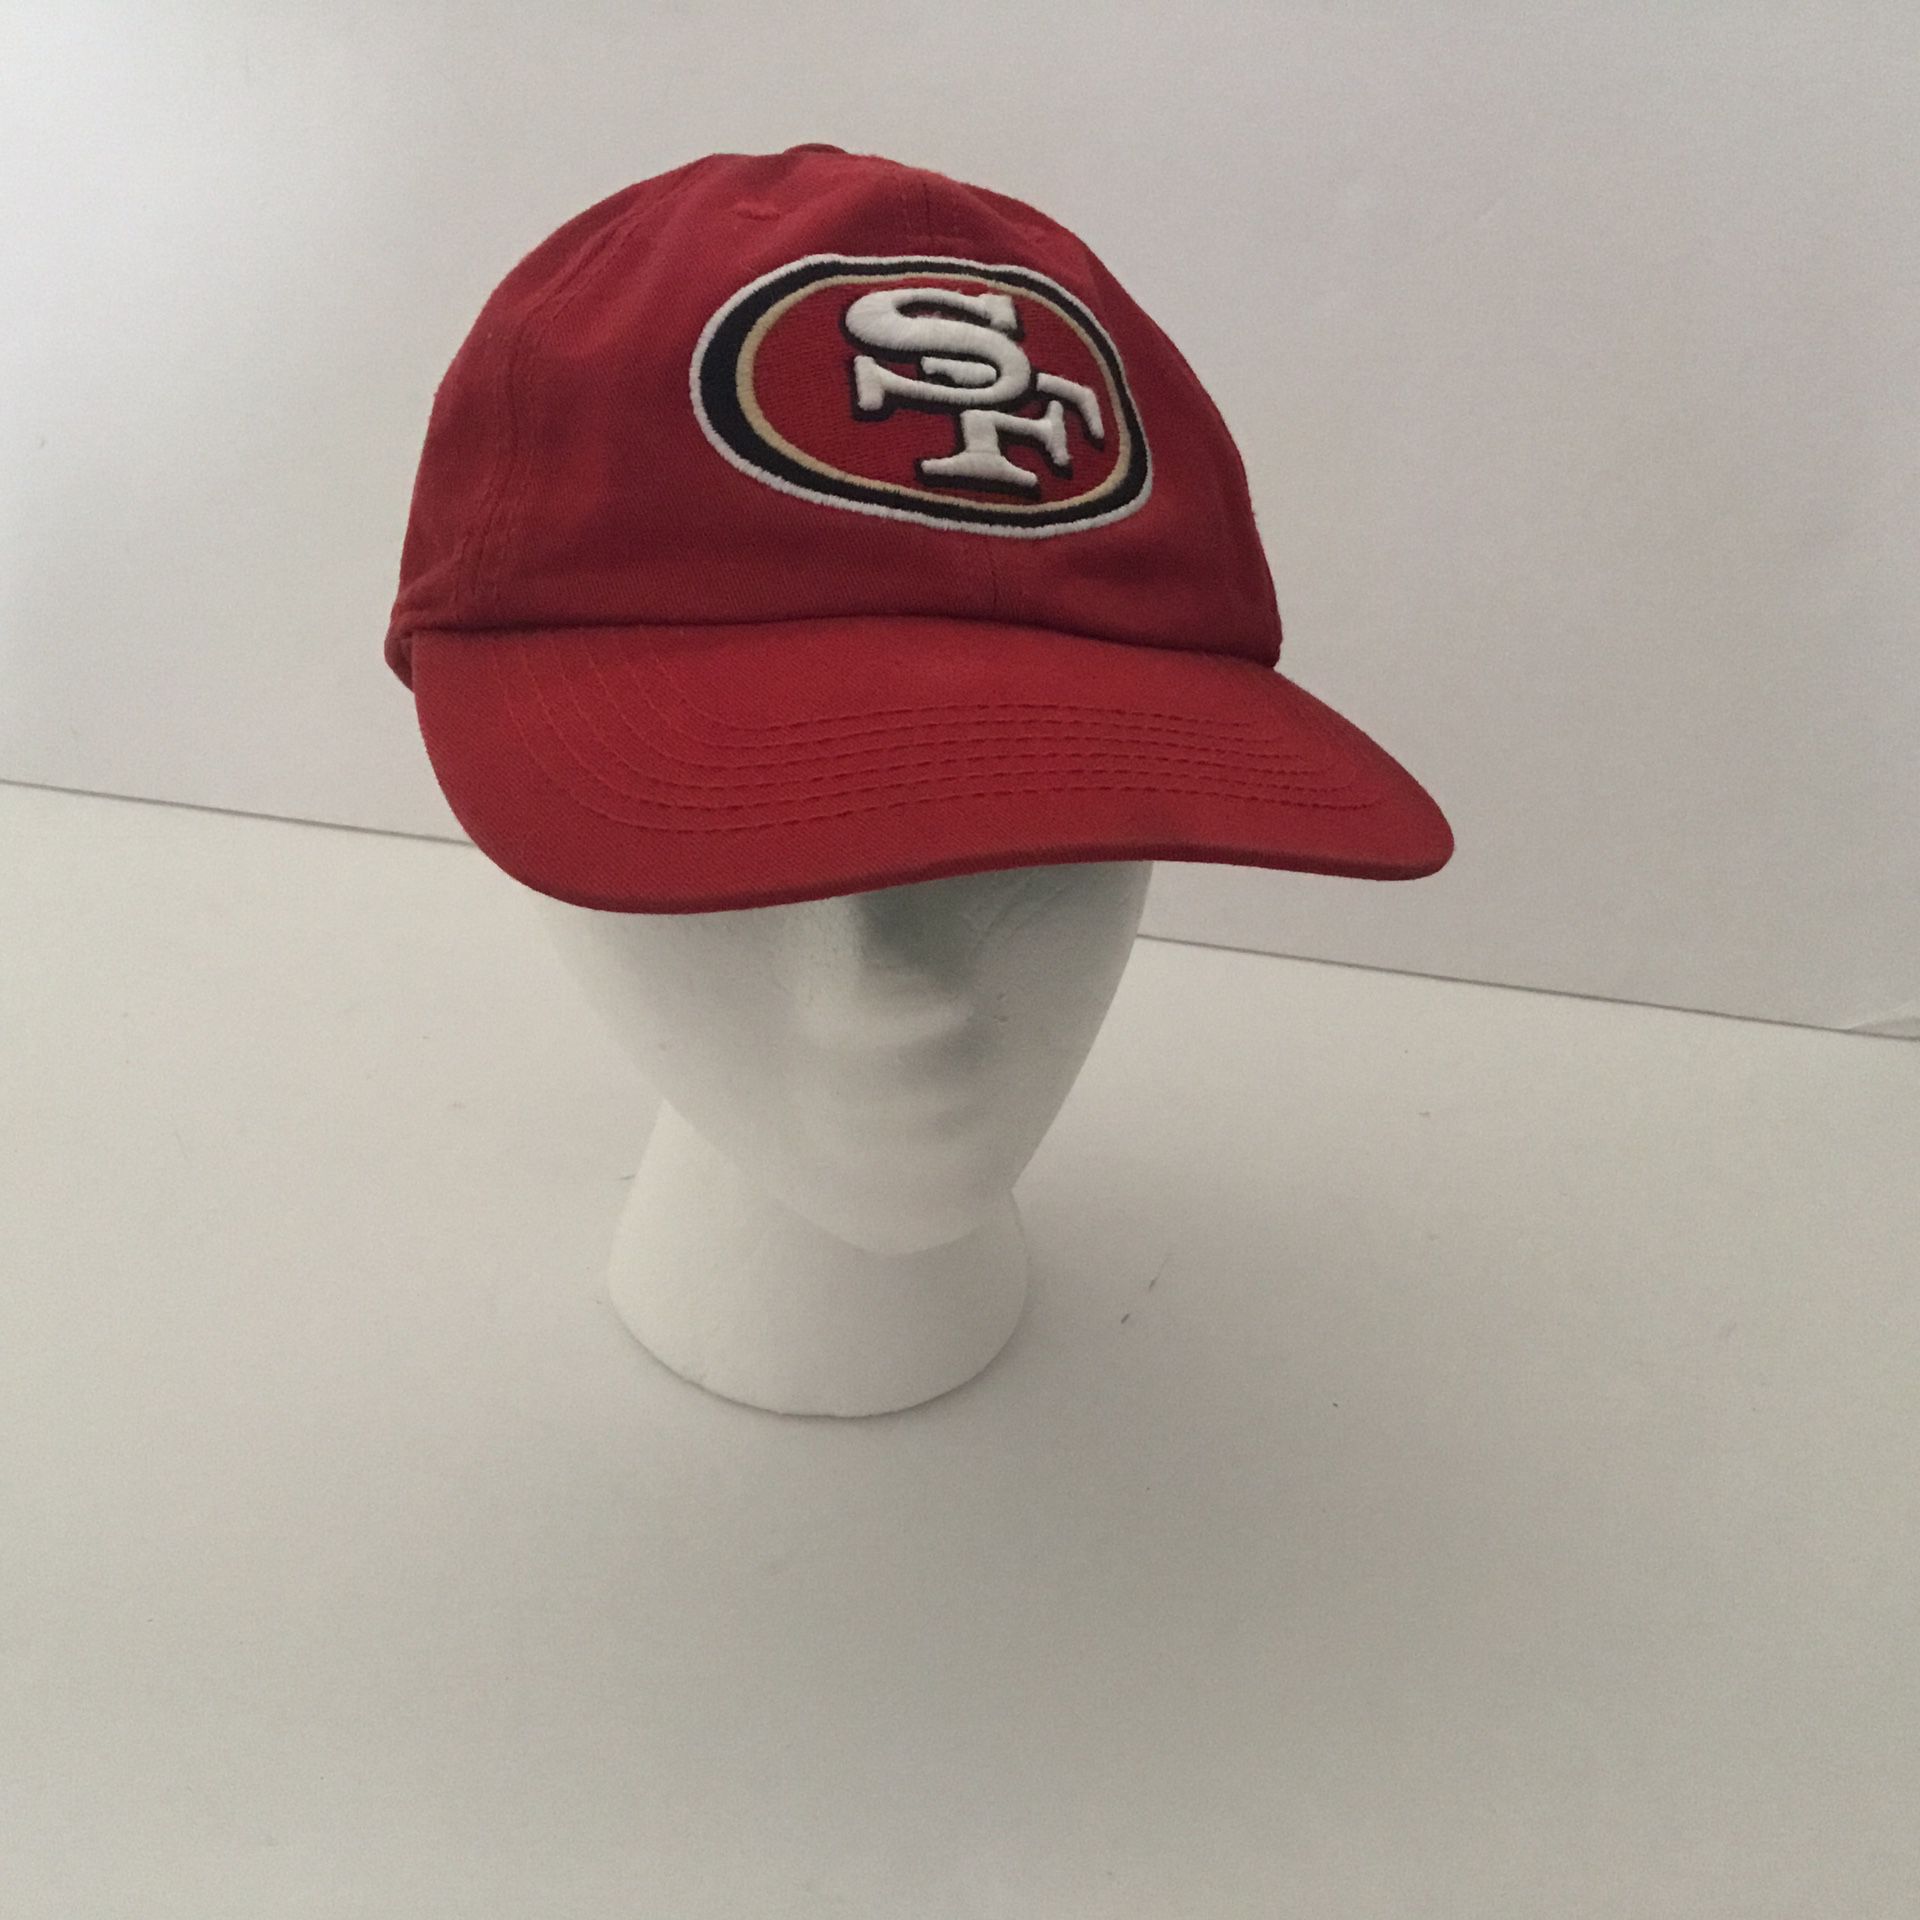 Baseball Hat.  Red. Fitted. S. SF 49ers 47 Brand